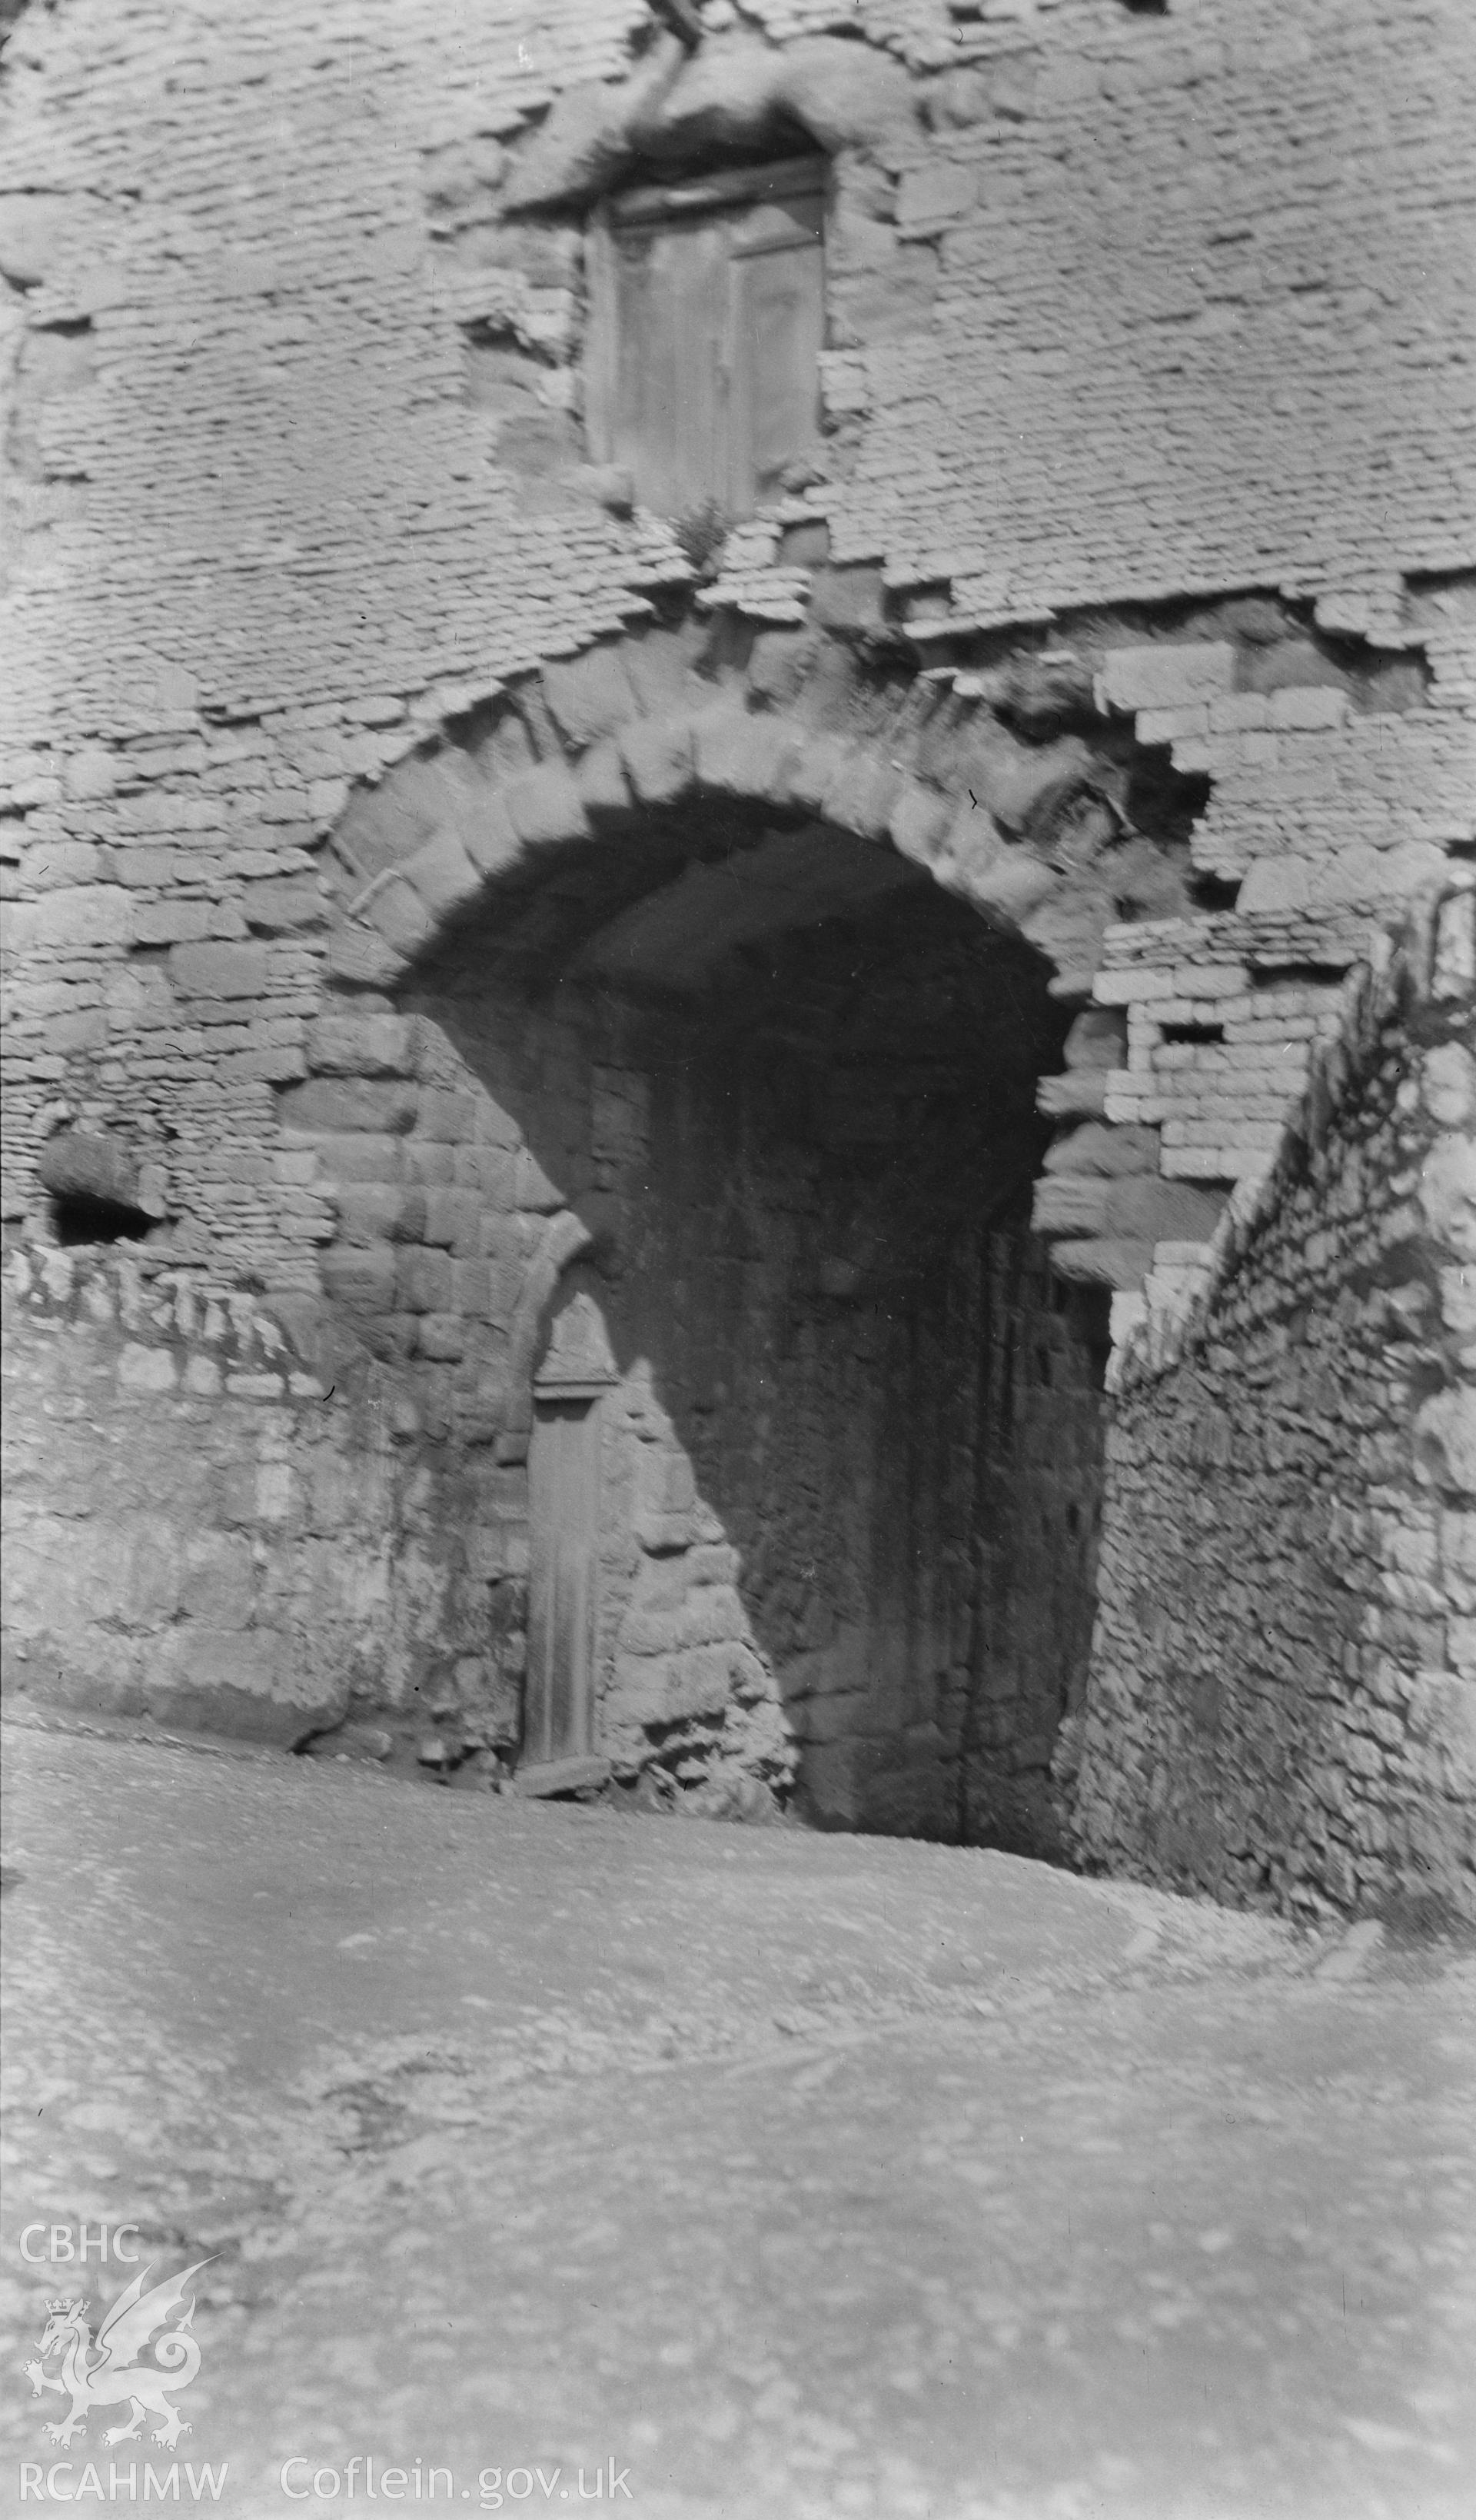 Digital copy of a nitrate negative showing view of Denbigh Castle, taken by RCAHMW, undated.